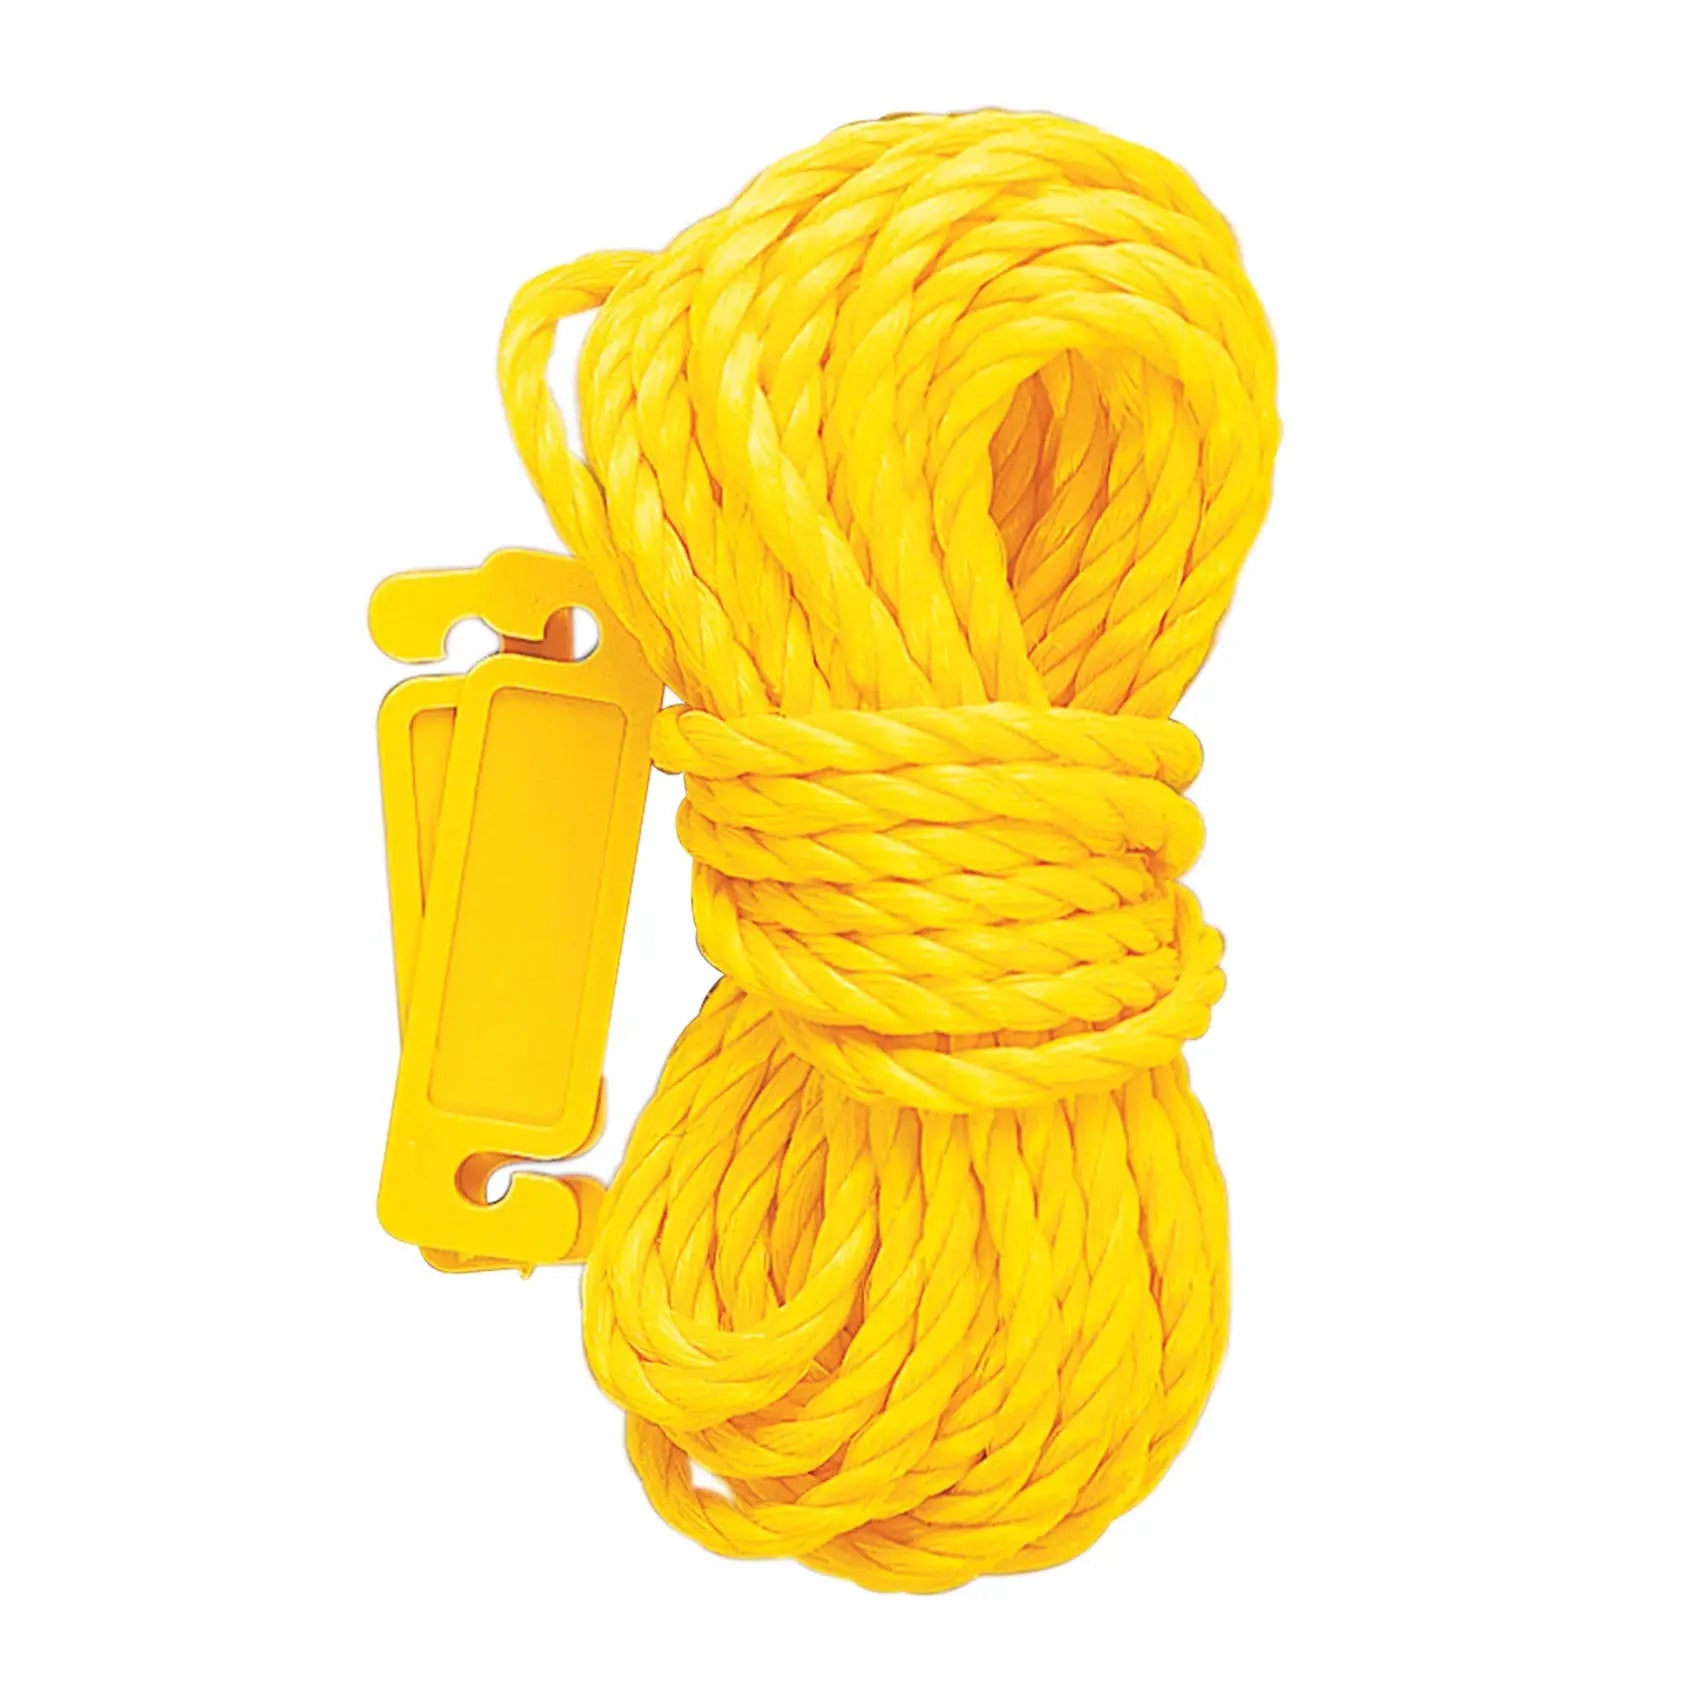 Coghlan's Clothes Line 25' x 3/16" Camping Survival Clothesline Rope with Slides Coghlan's